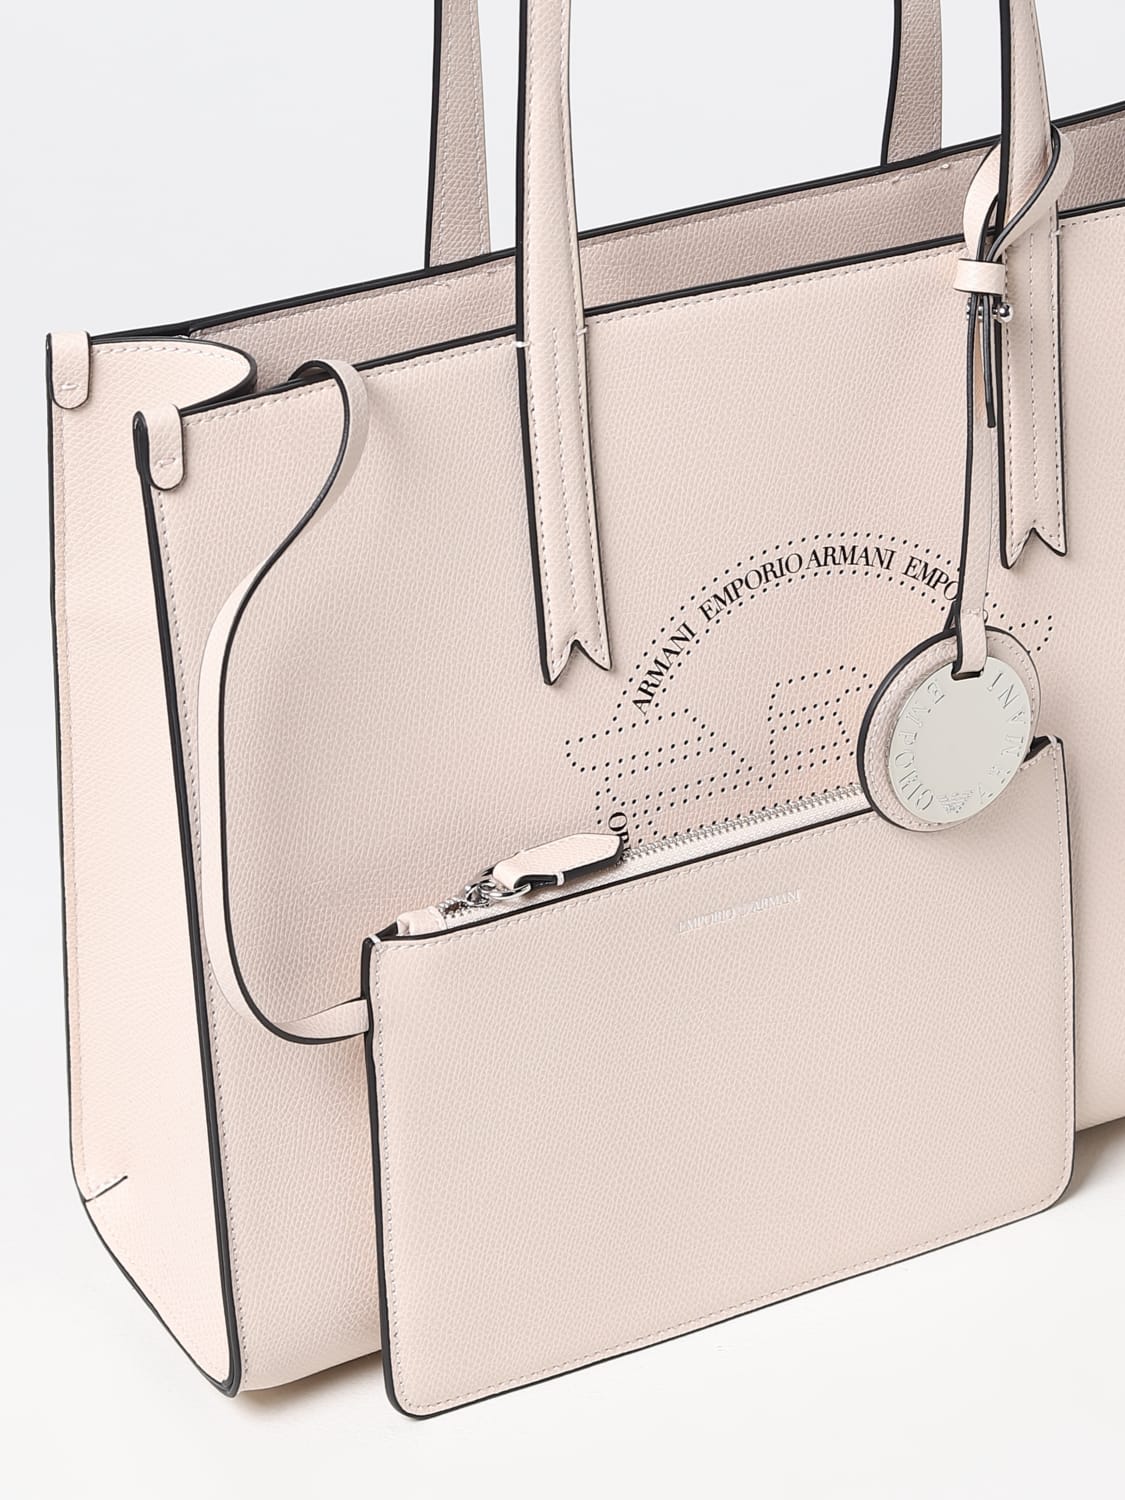 Diplomati helikopter vandrerhjemmet EMPORIO ARMANI: bag in grained synthetic leather - Nude | Emporio Armani  tote bags Y3D244YVL1E online on GIGLIO.COM